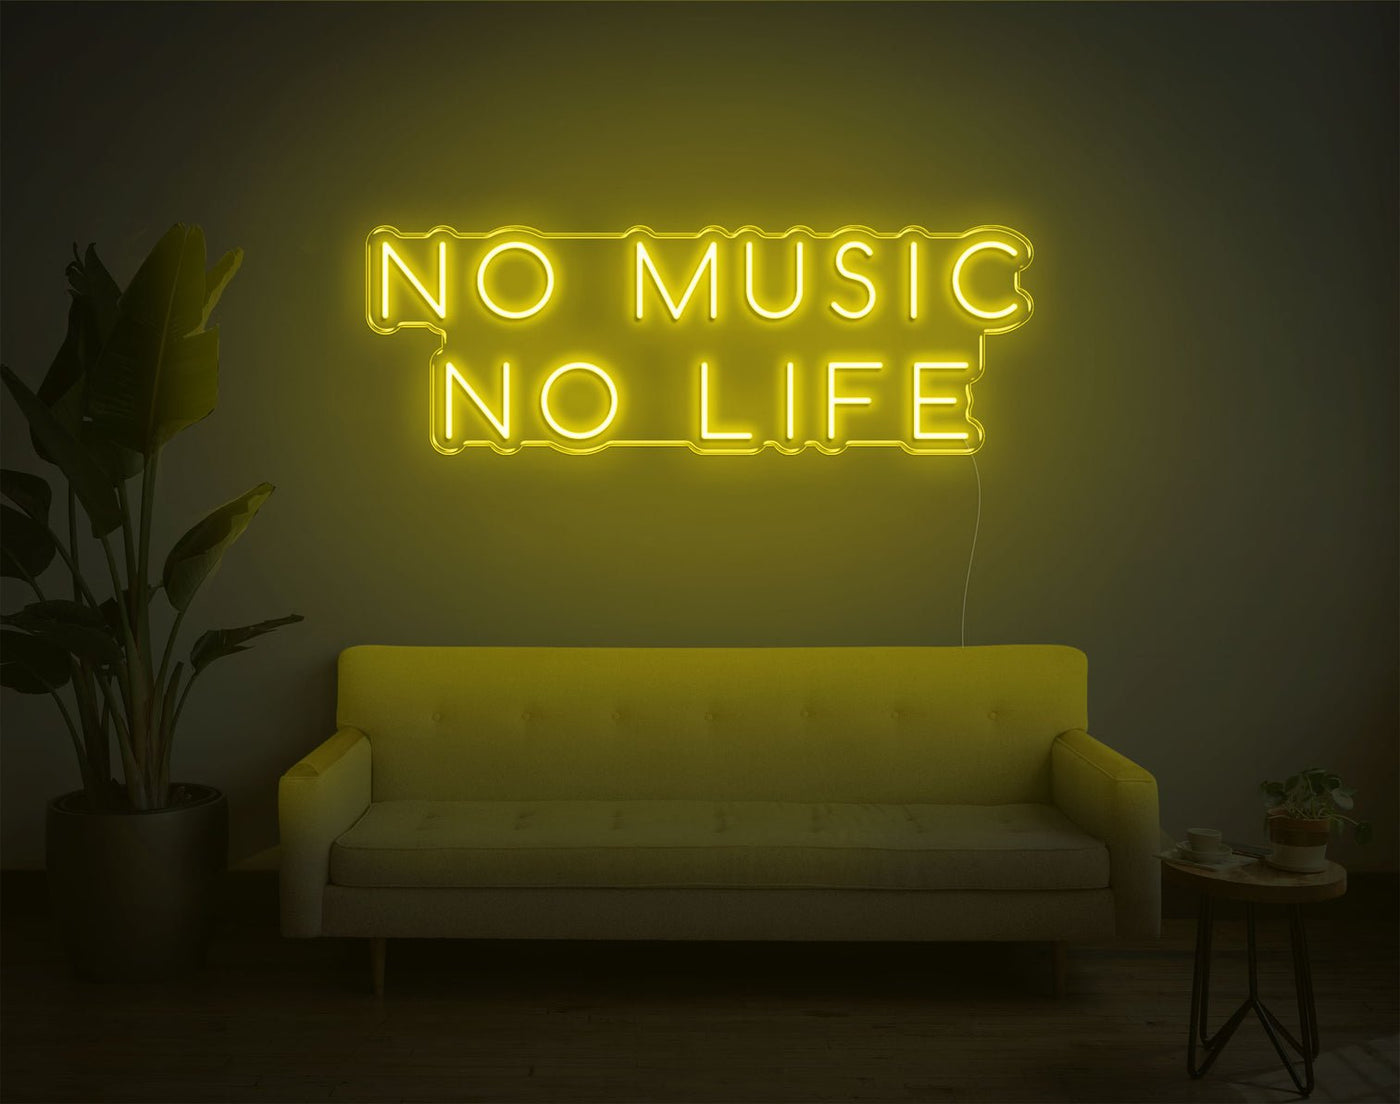 No Music No Life LED Neon Sign - 12inch x 34inchYellow